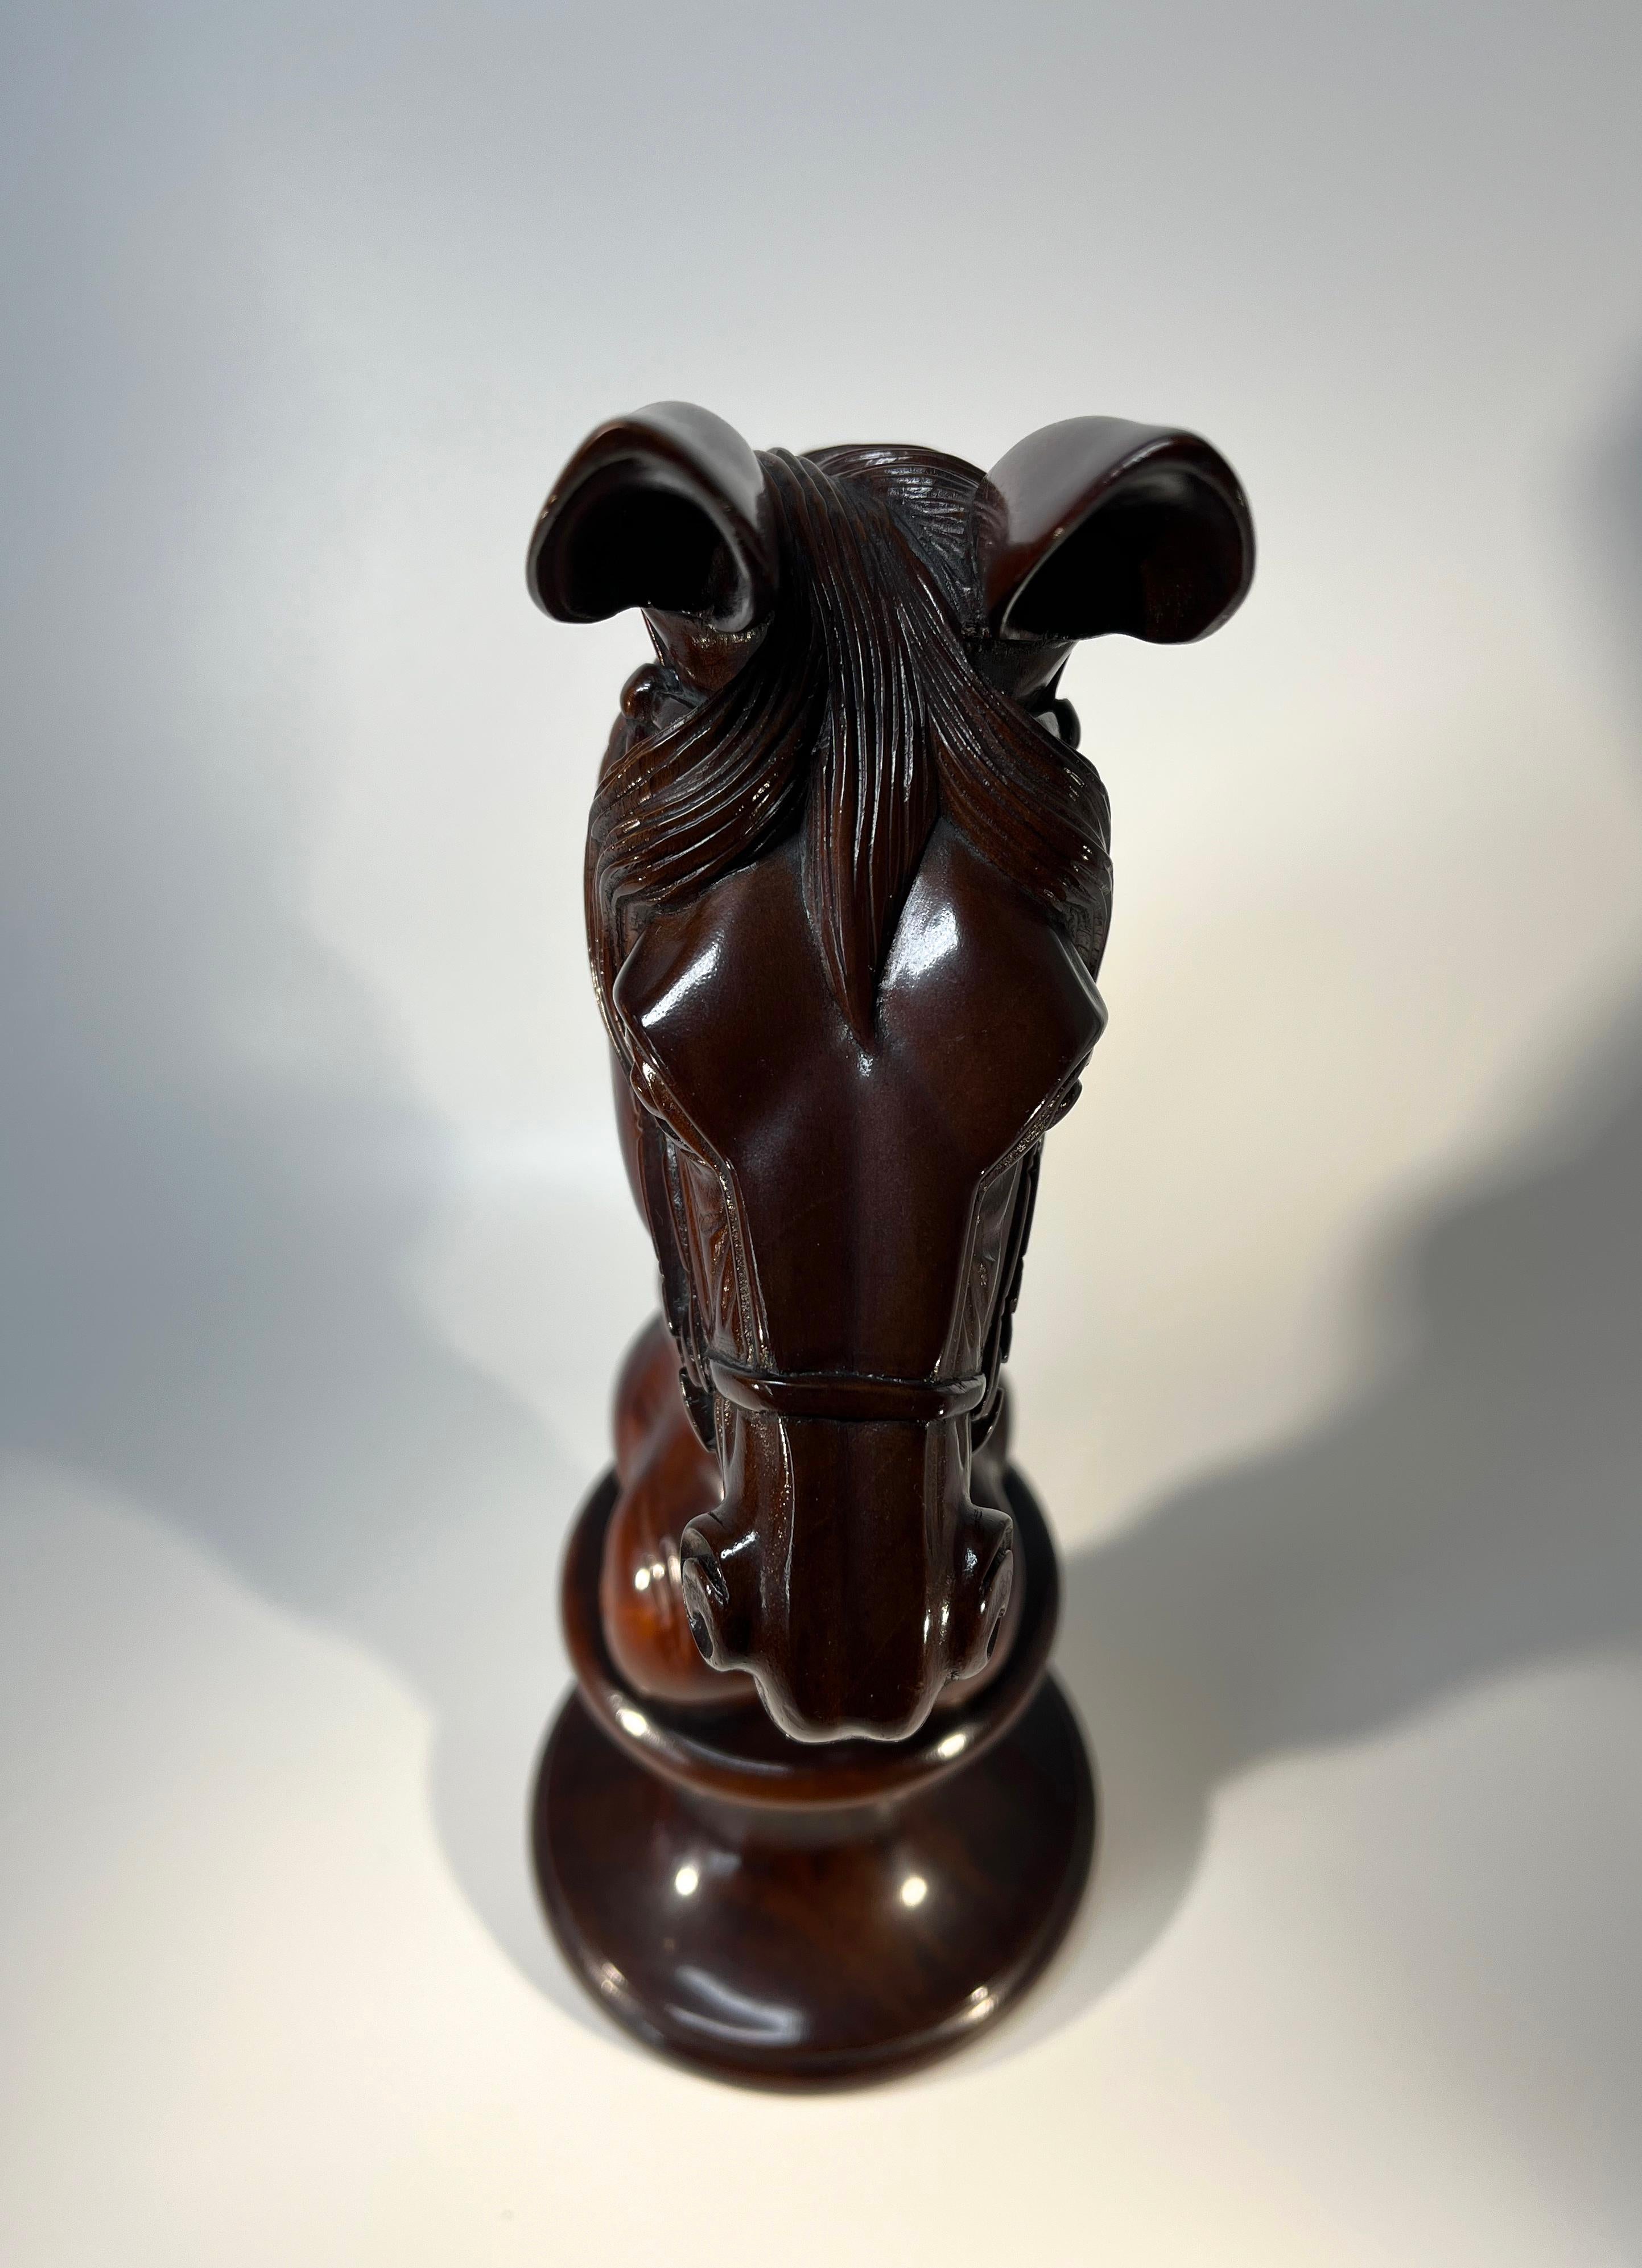 Carousel Galloper's Horses Head Carved Mahogany Bust For Sale 3